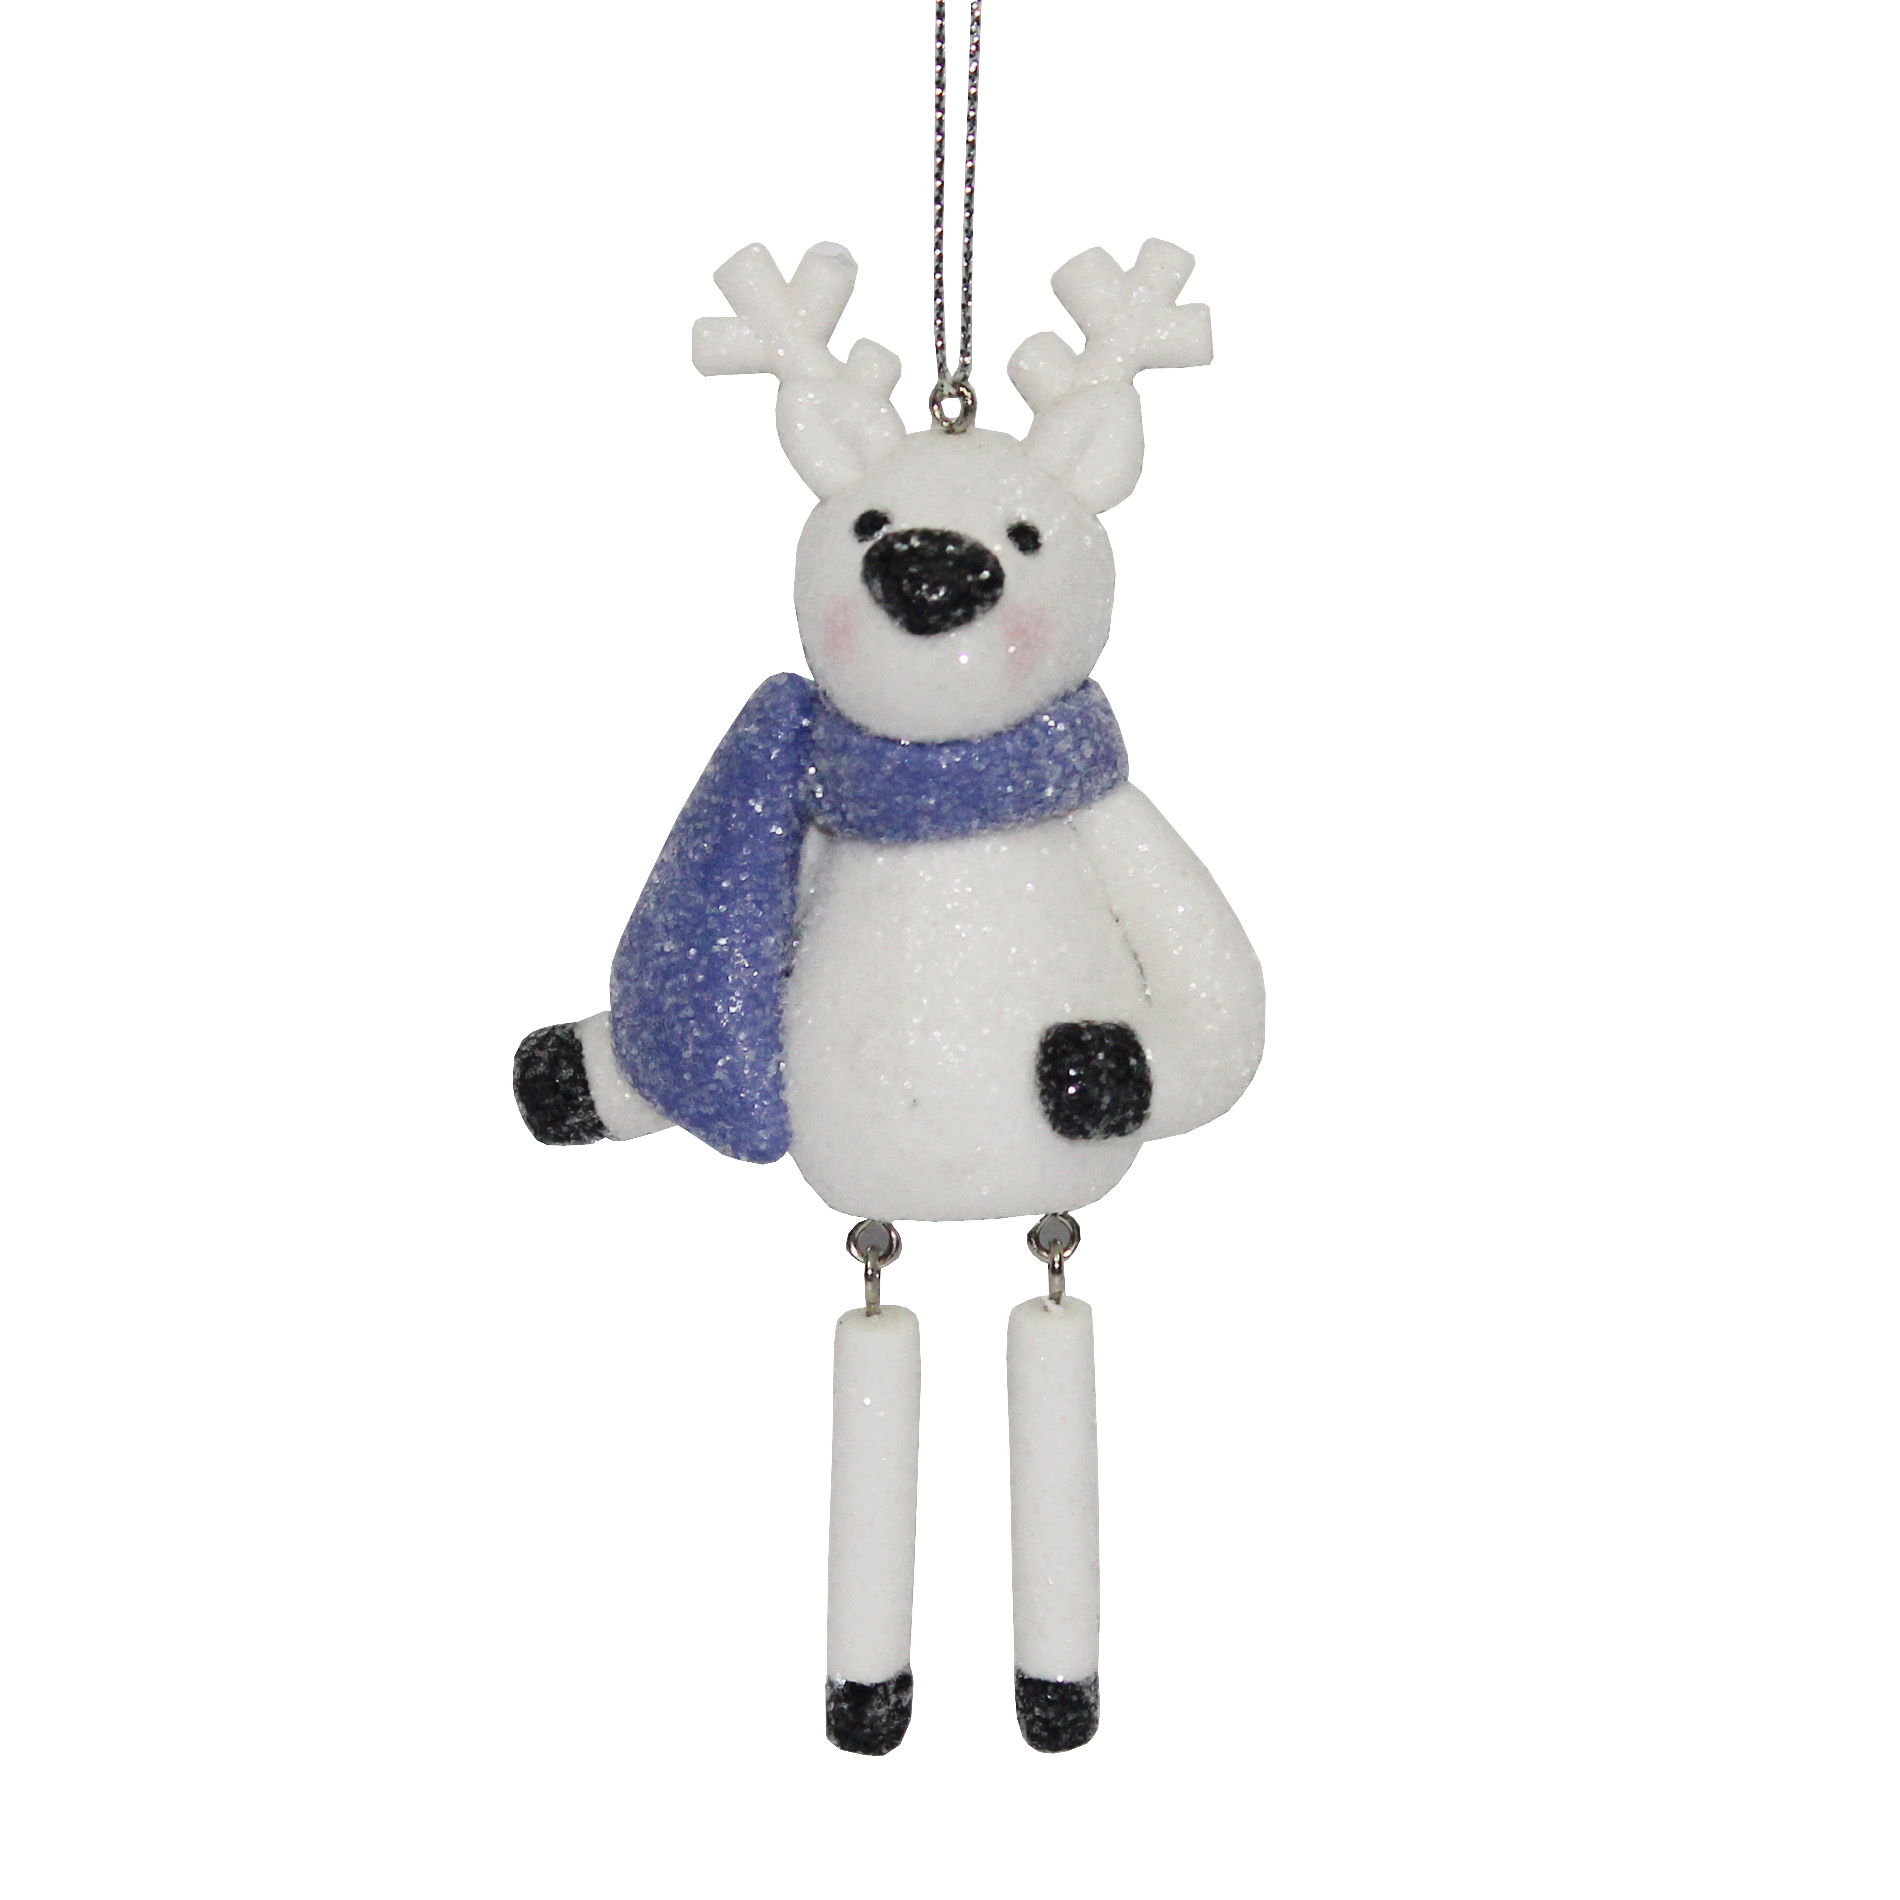 Donner & Blitzen Incorporated Reindeer with Purple Scarf and Dangly Legs Ornament